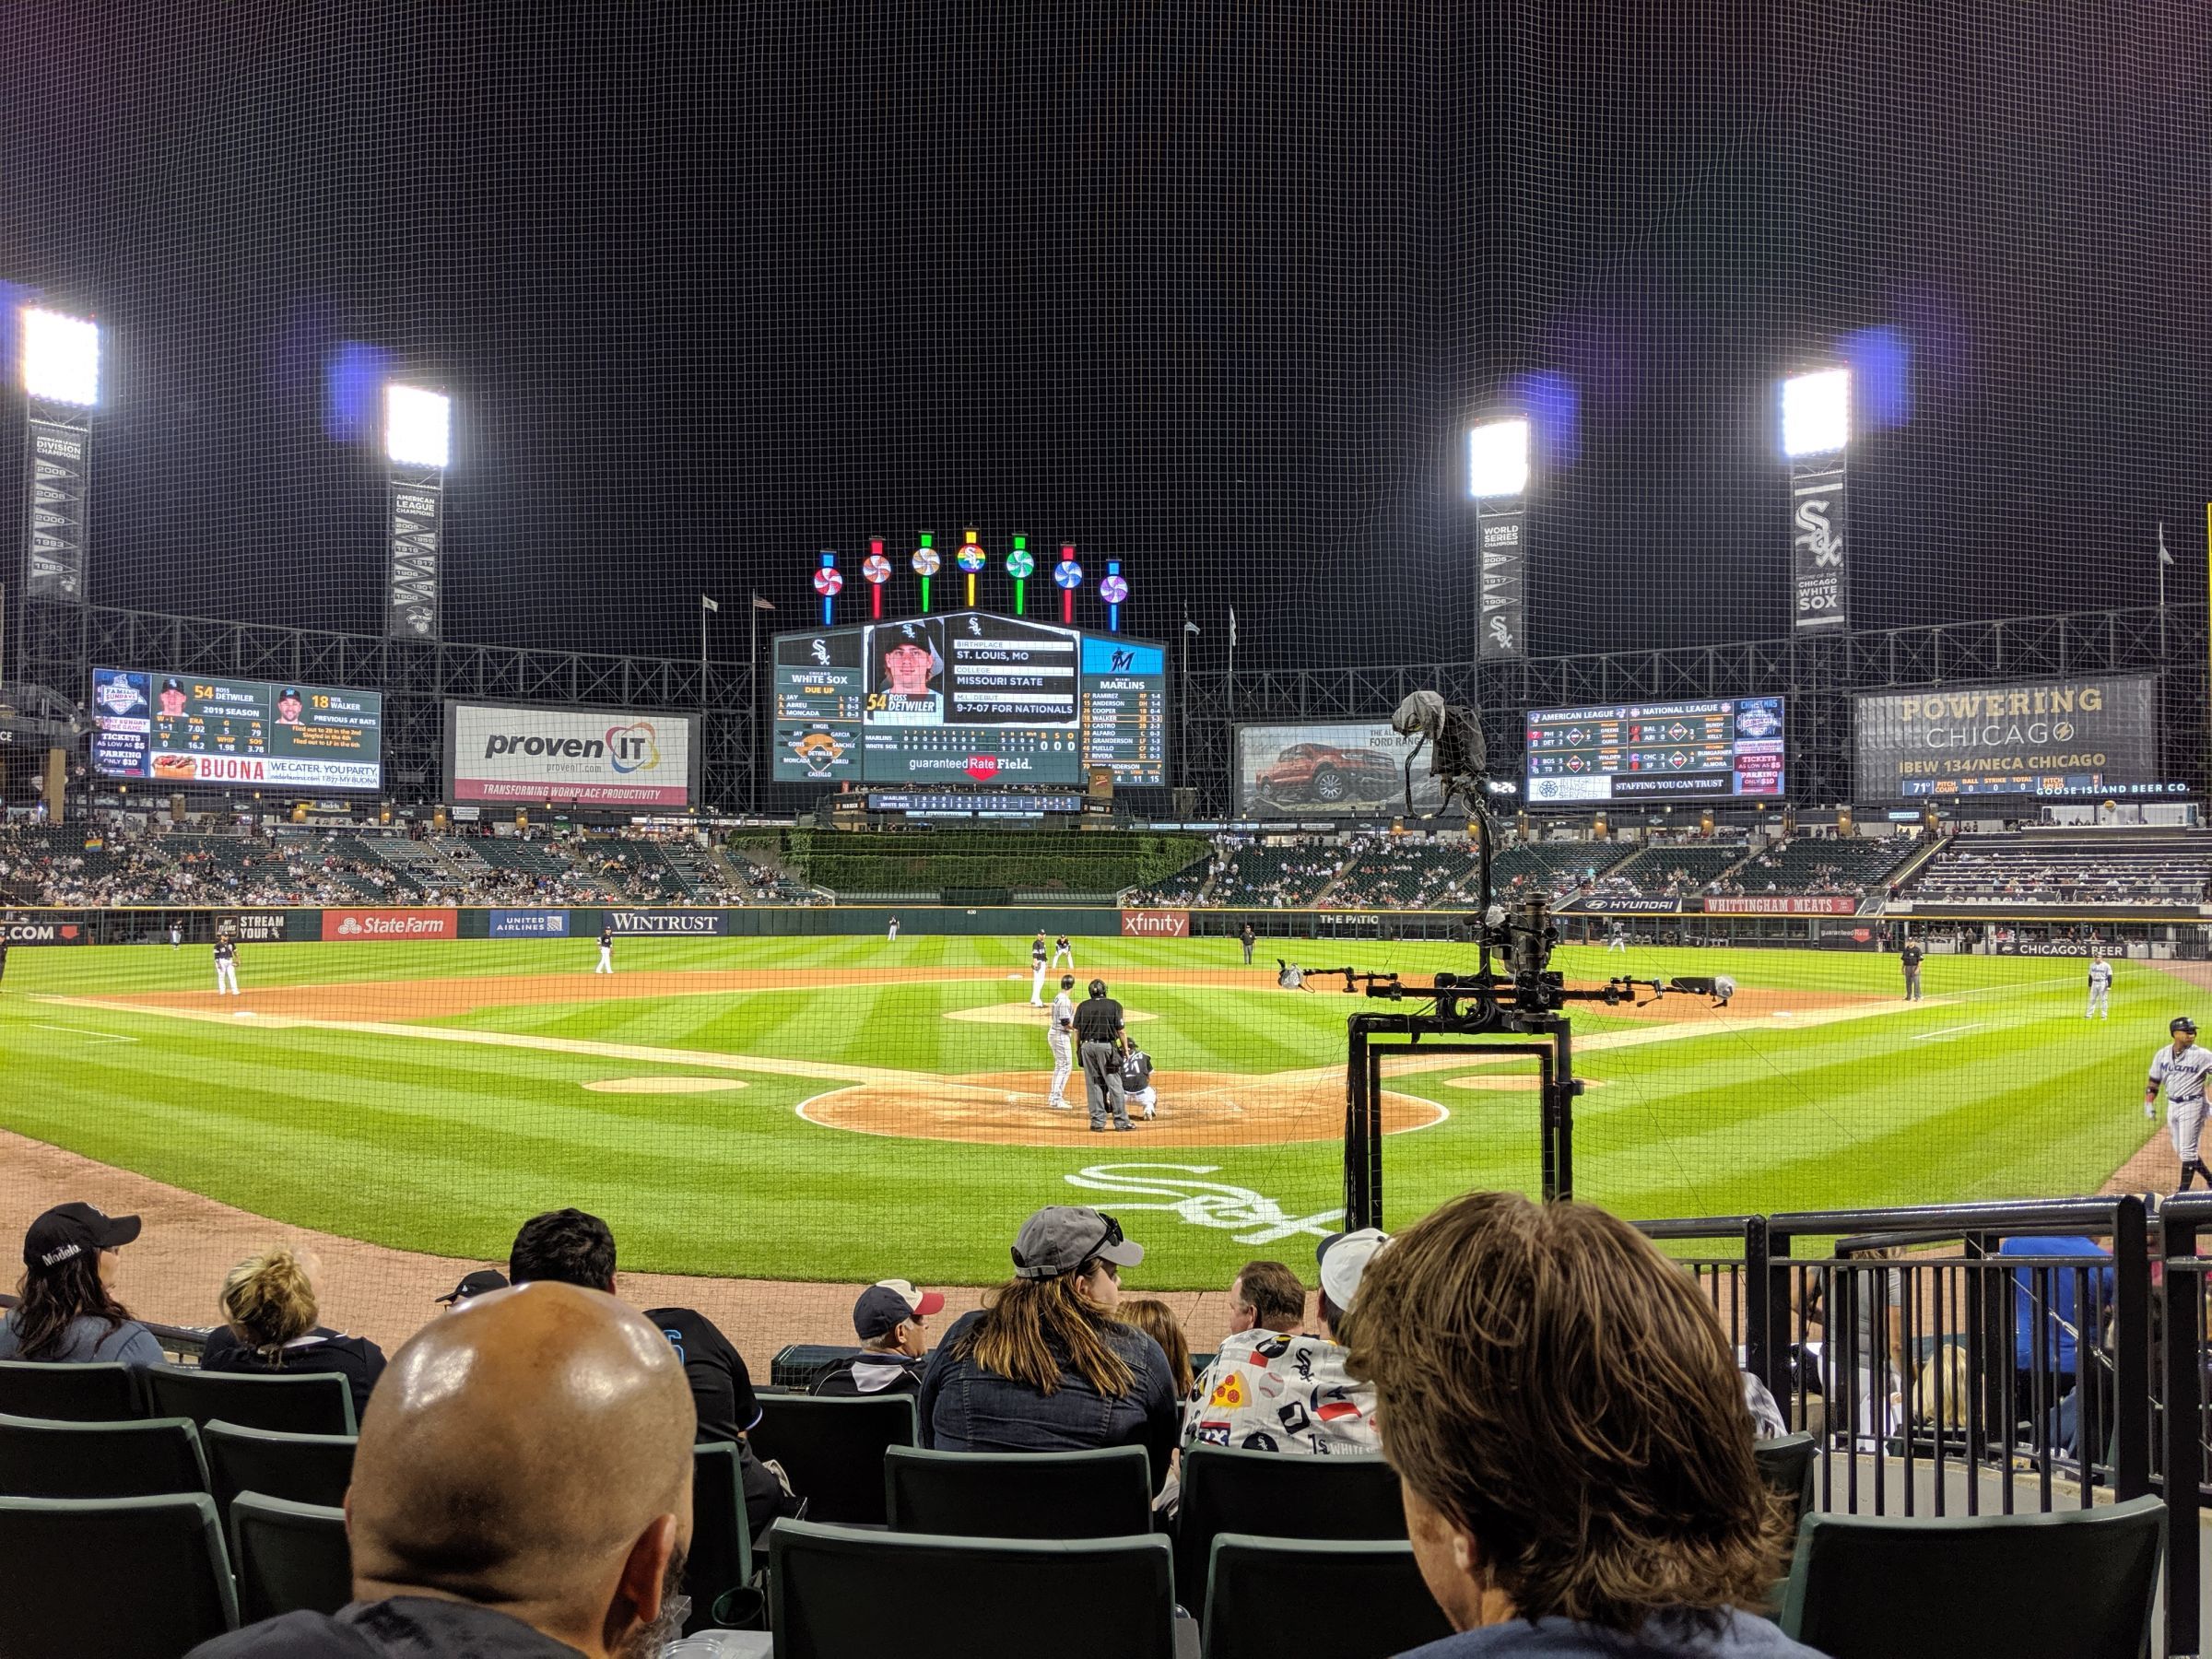 scout seats 133, row 9 seat view  - guaranteed rate field